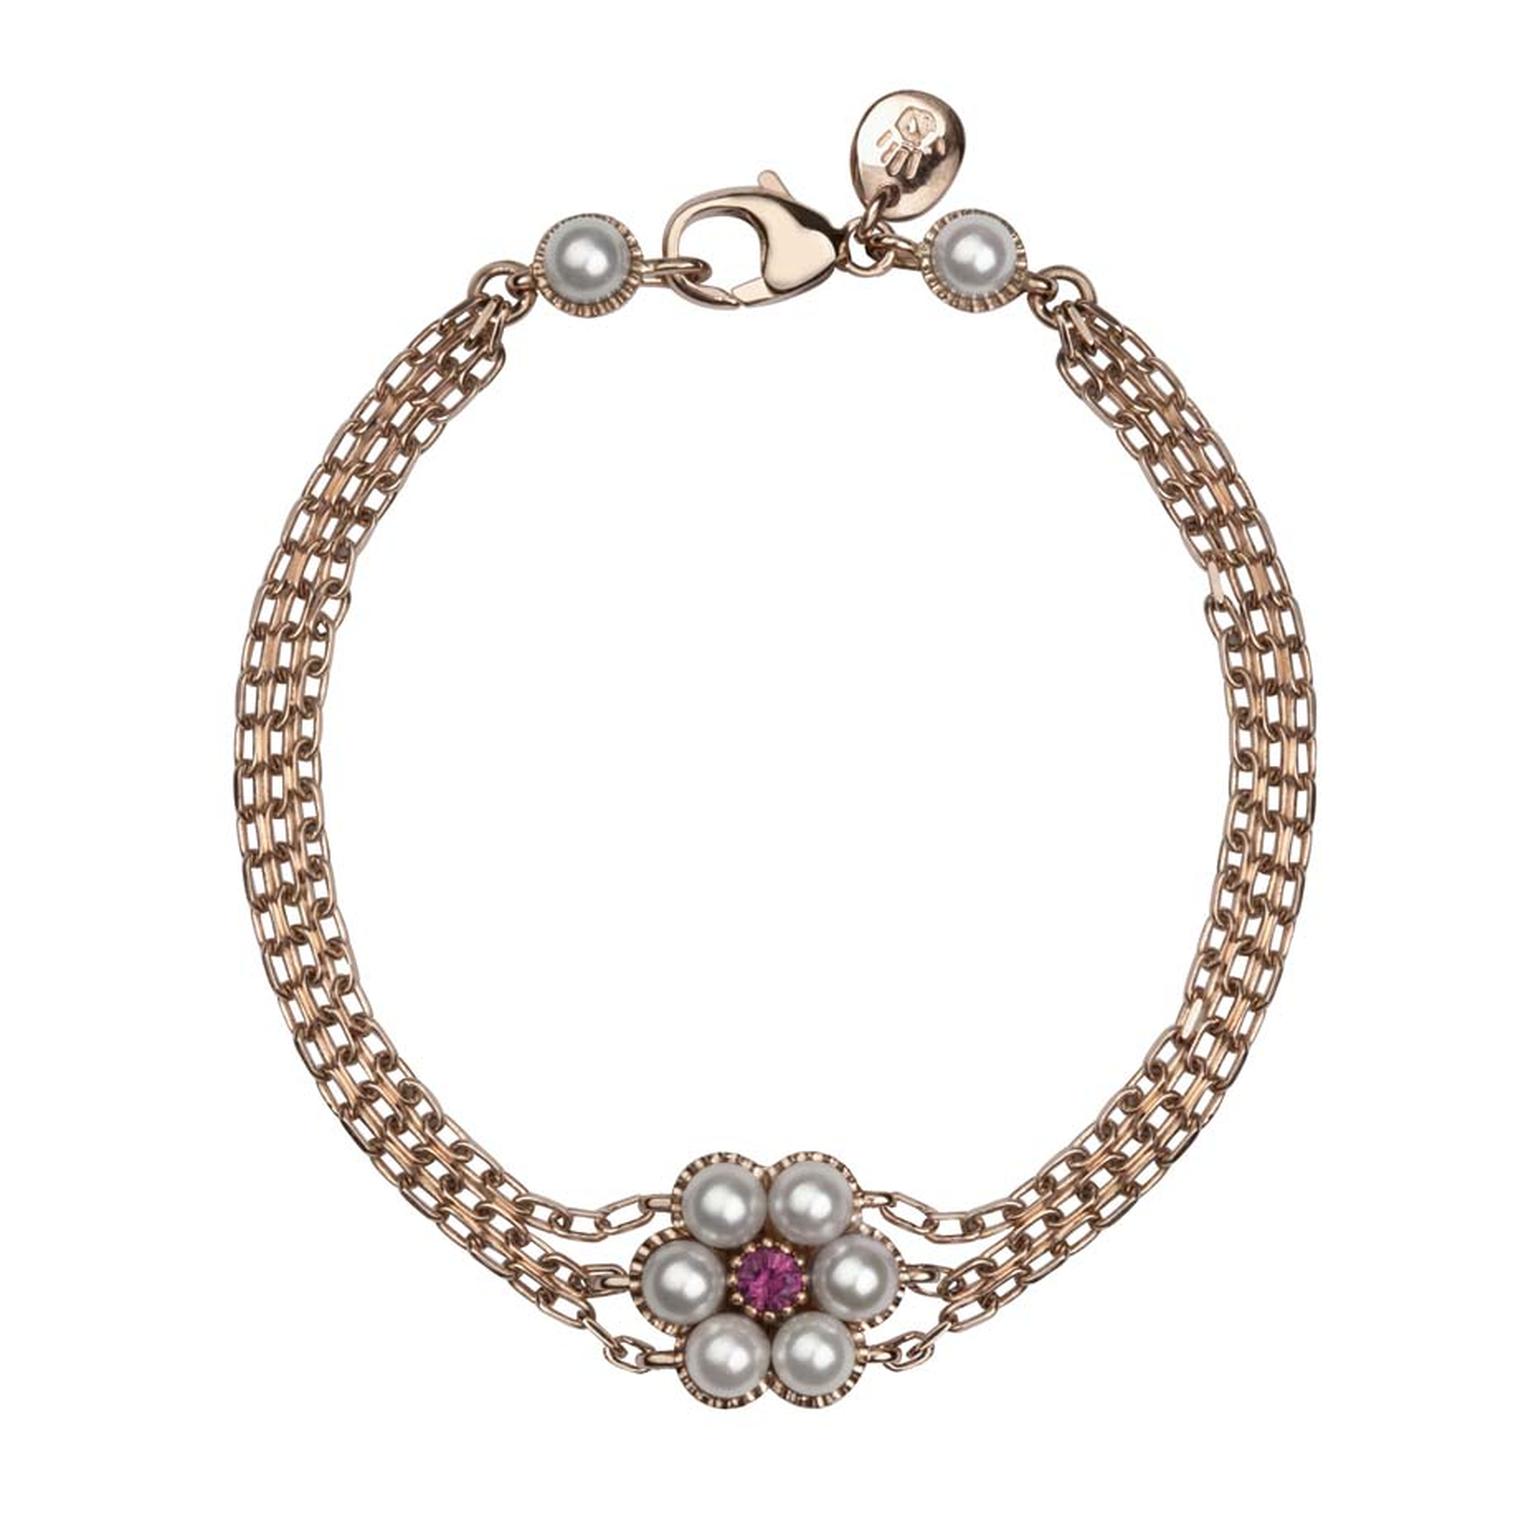 Rose gold, Akoya pearl and ruby bracelet from Stephen Einhorn's new Posey collection, inspired by the ring worn by Cate Blanchett in Disney's remake of Cinderella (£1,427).